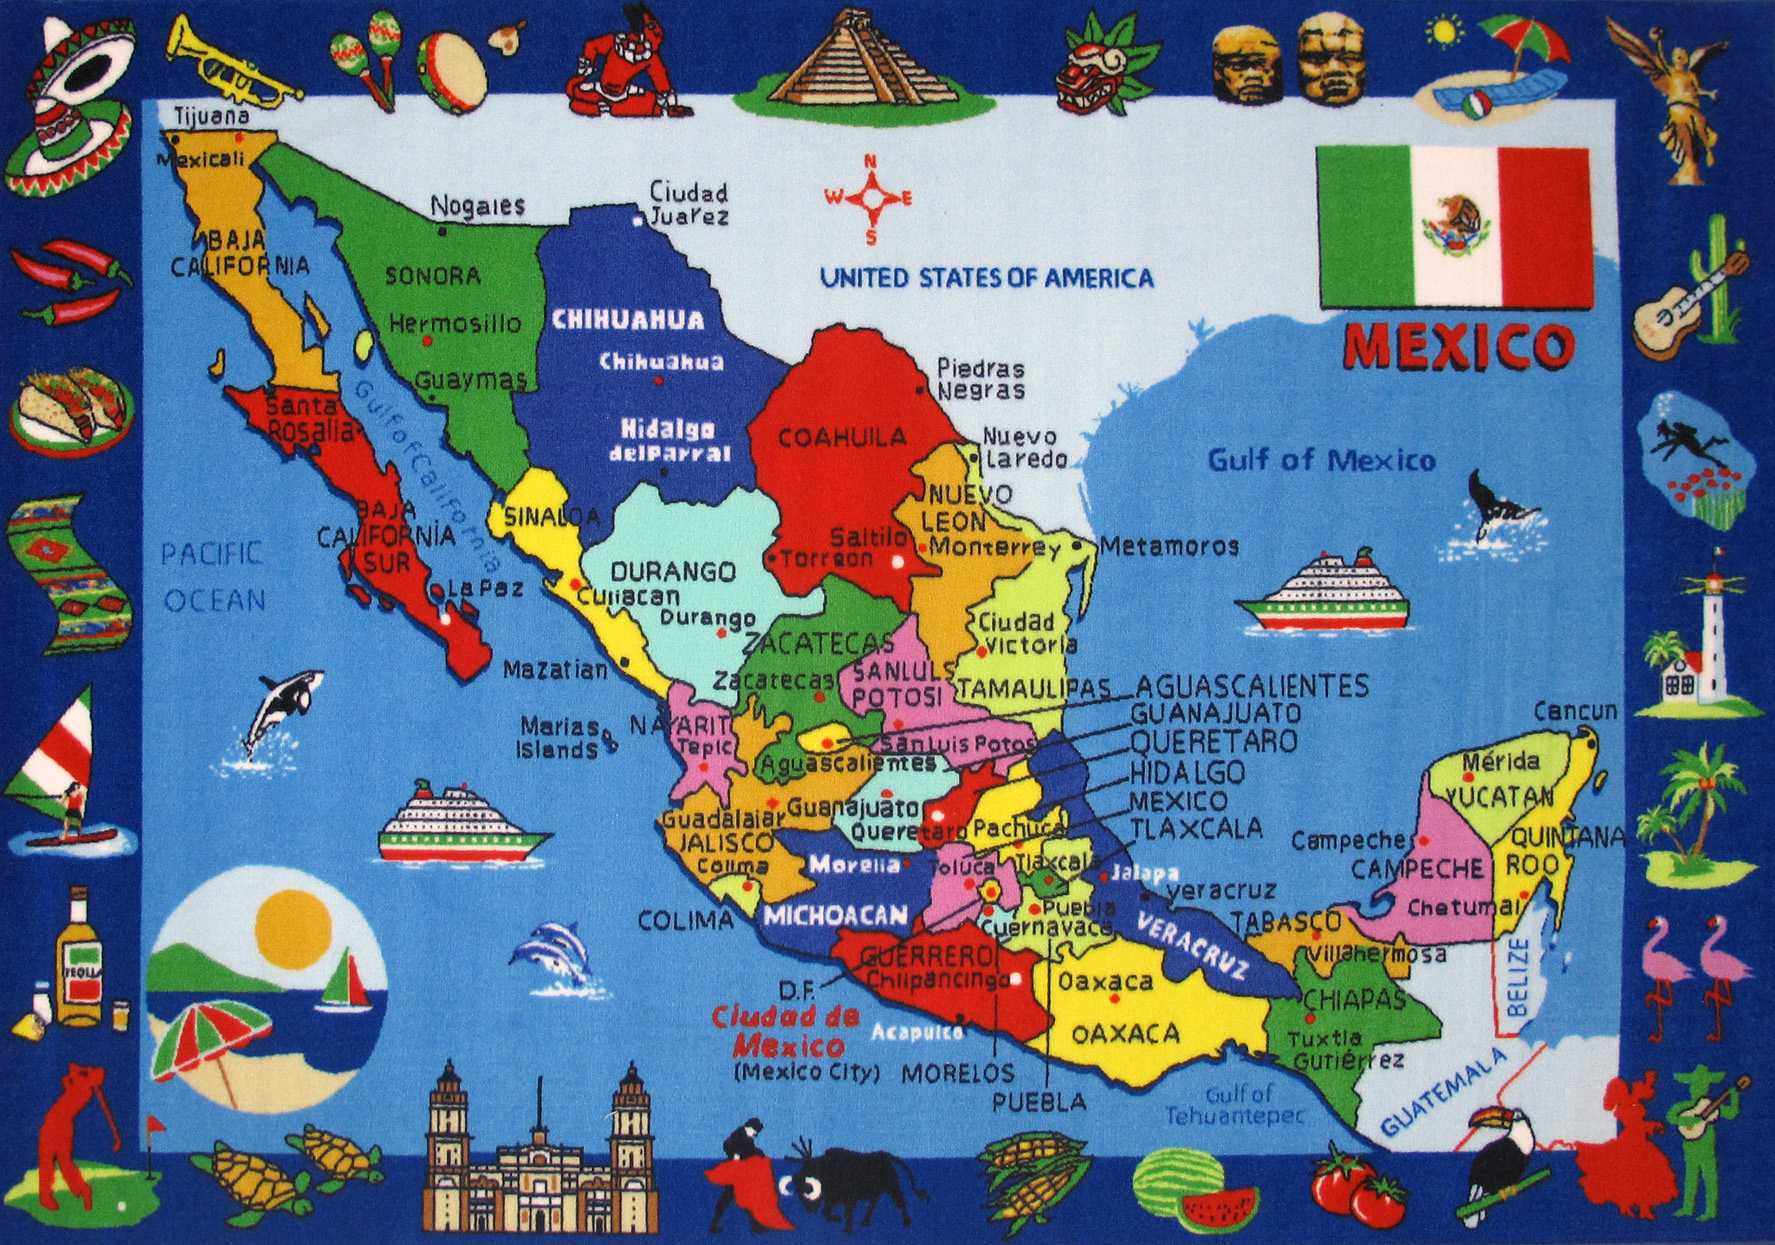 large-detailed-tourist-illustrated-map-of-mexico-mexico-large-detailed